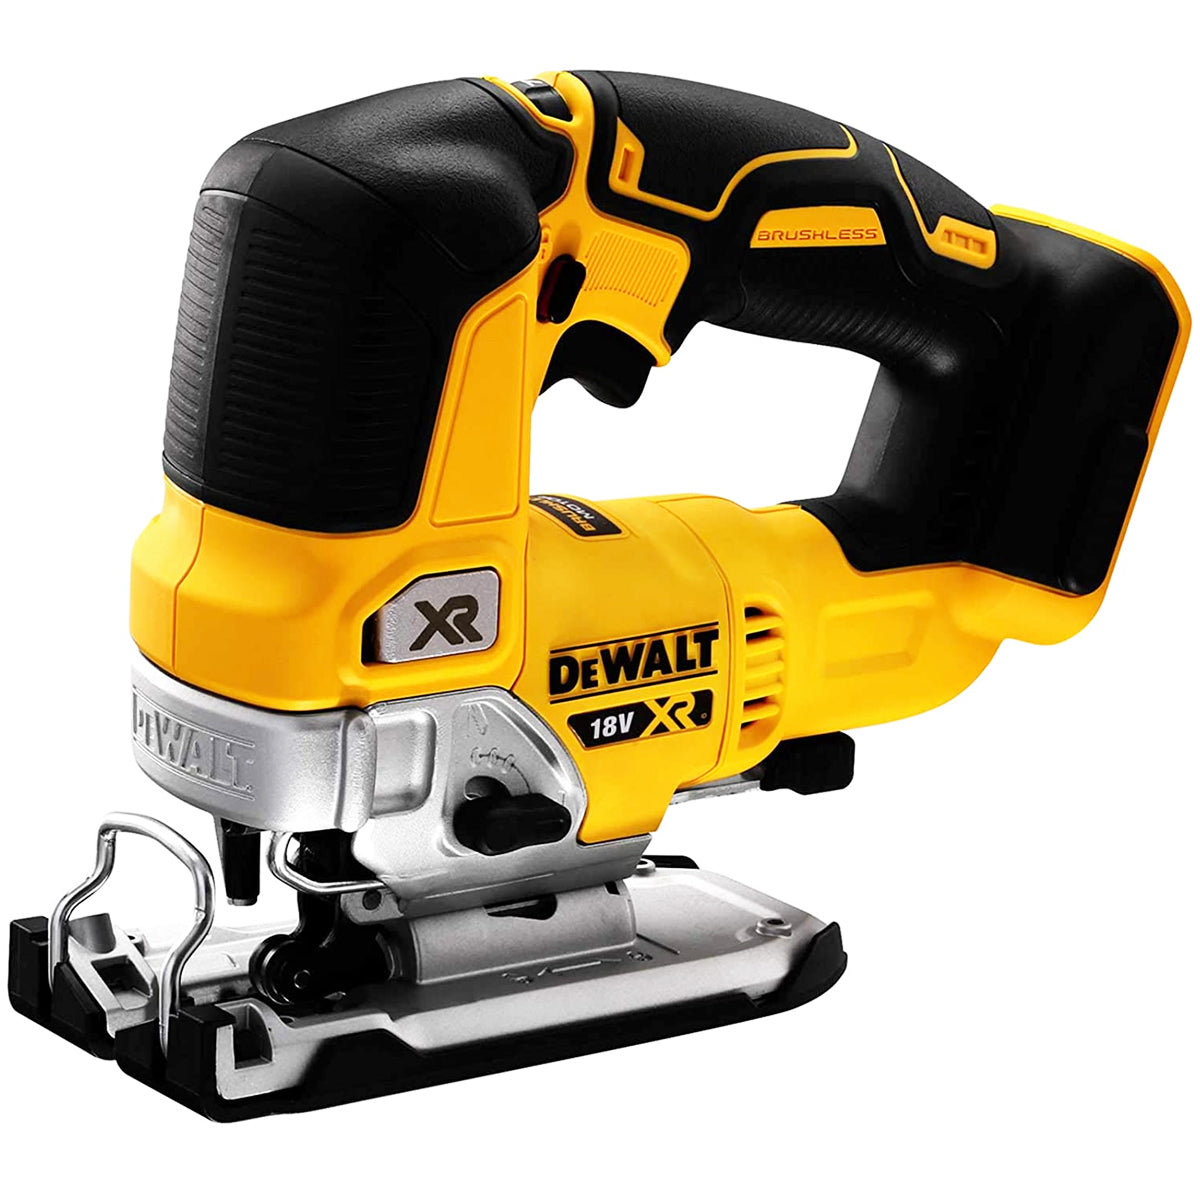 Dewalt DEWKIT90 18V Cordless 8 Piece Kit with 4 x 5.0Ah Batteries & Charger in TSTAK